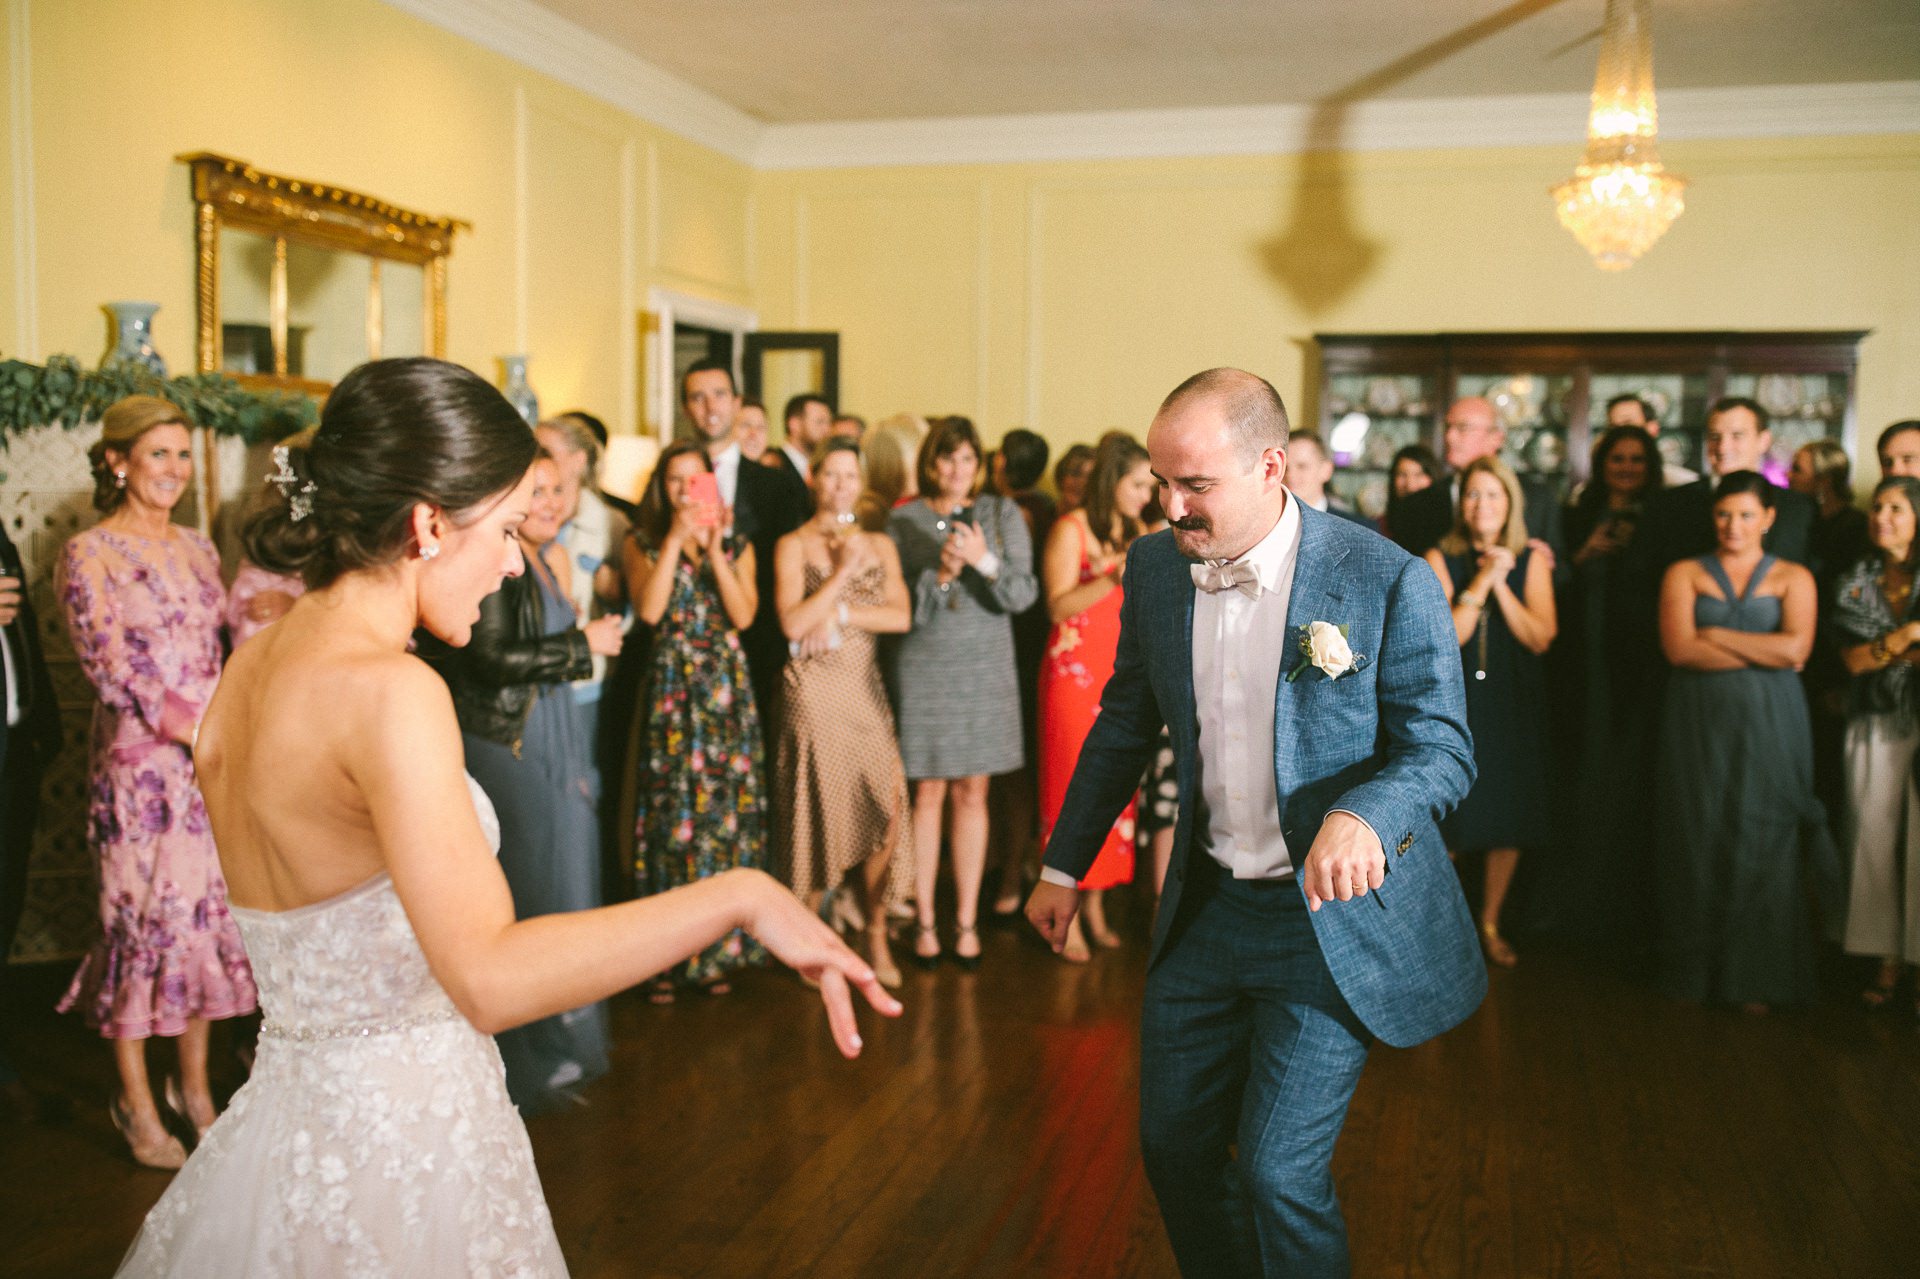 Wedding at Kirtland Country Club in Willoughby 3 39.jpg